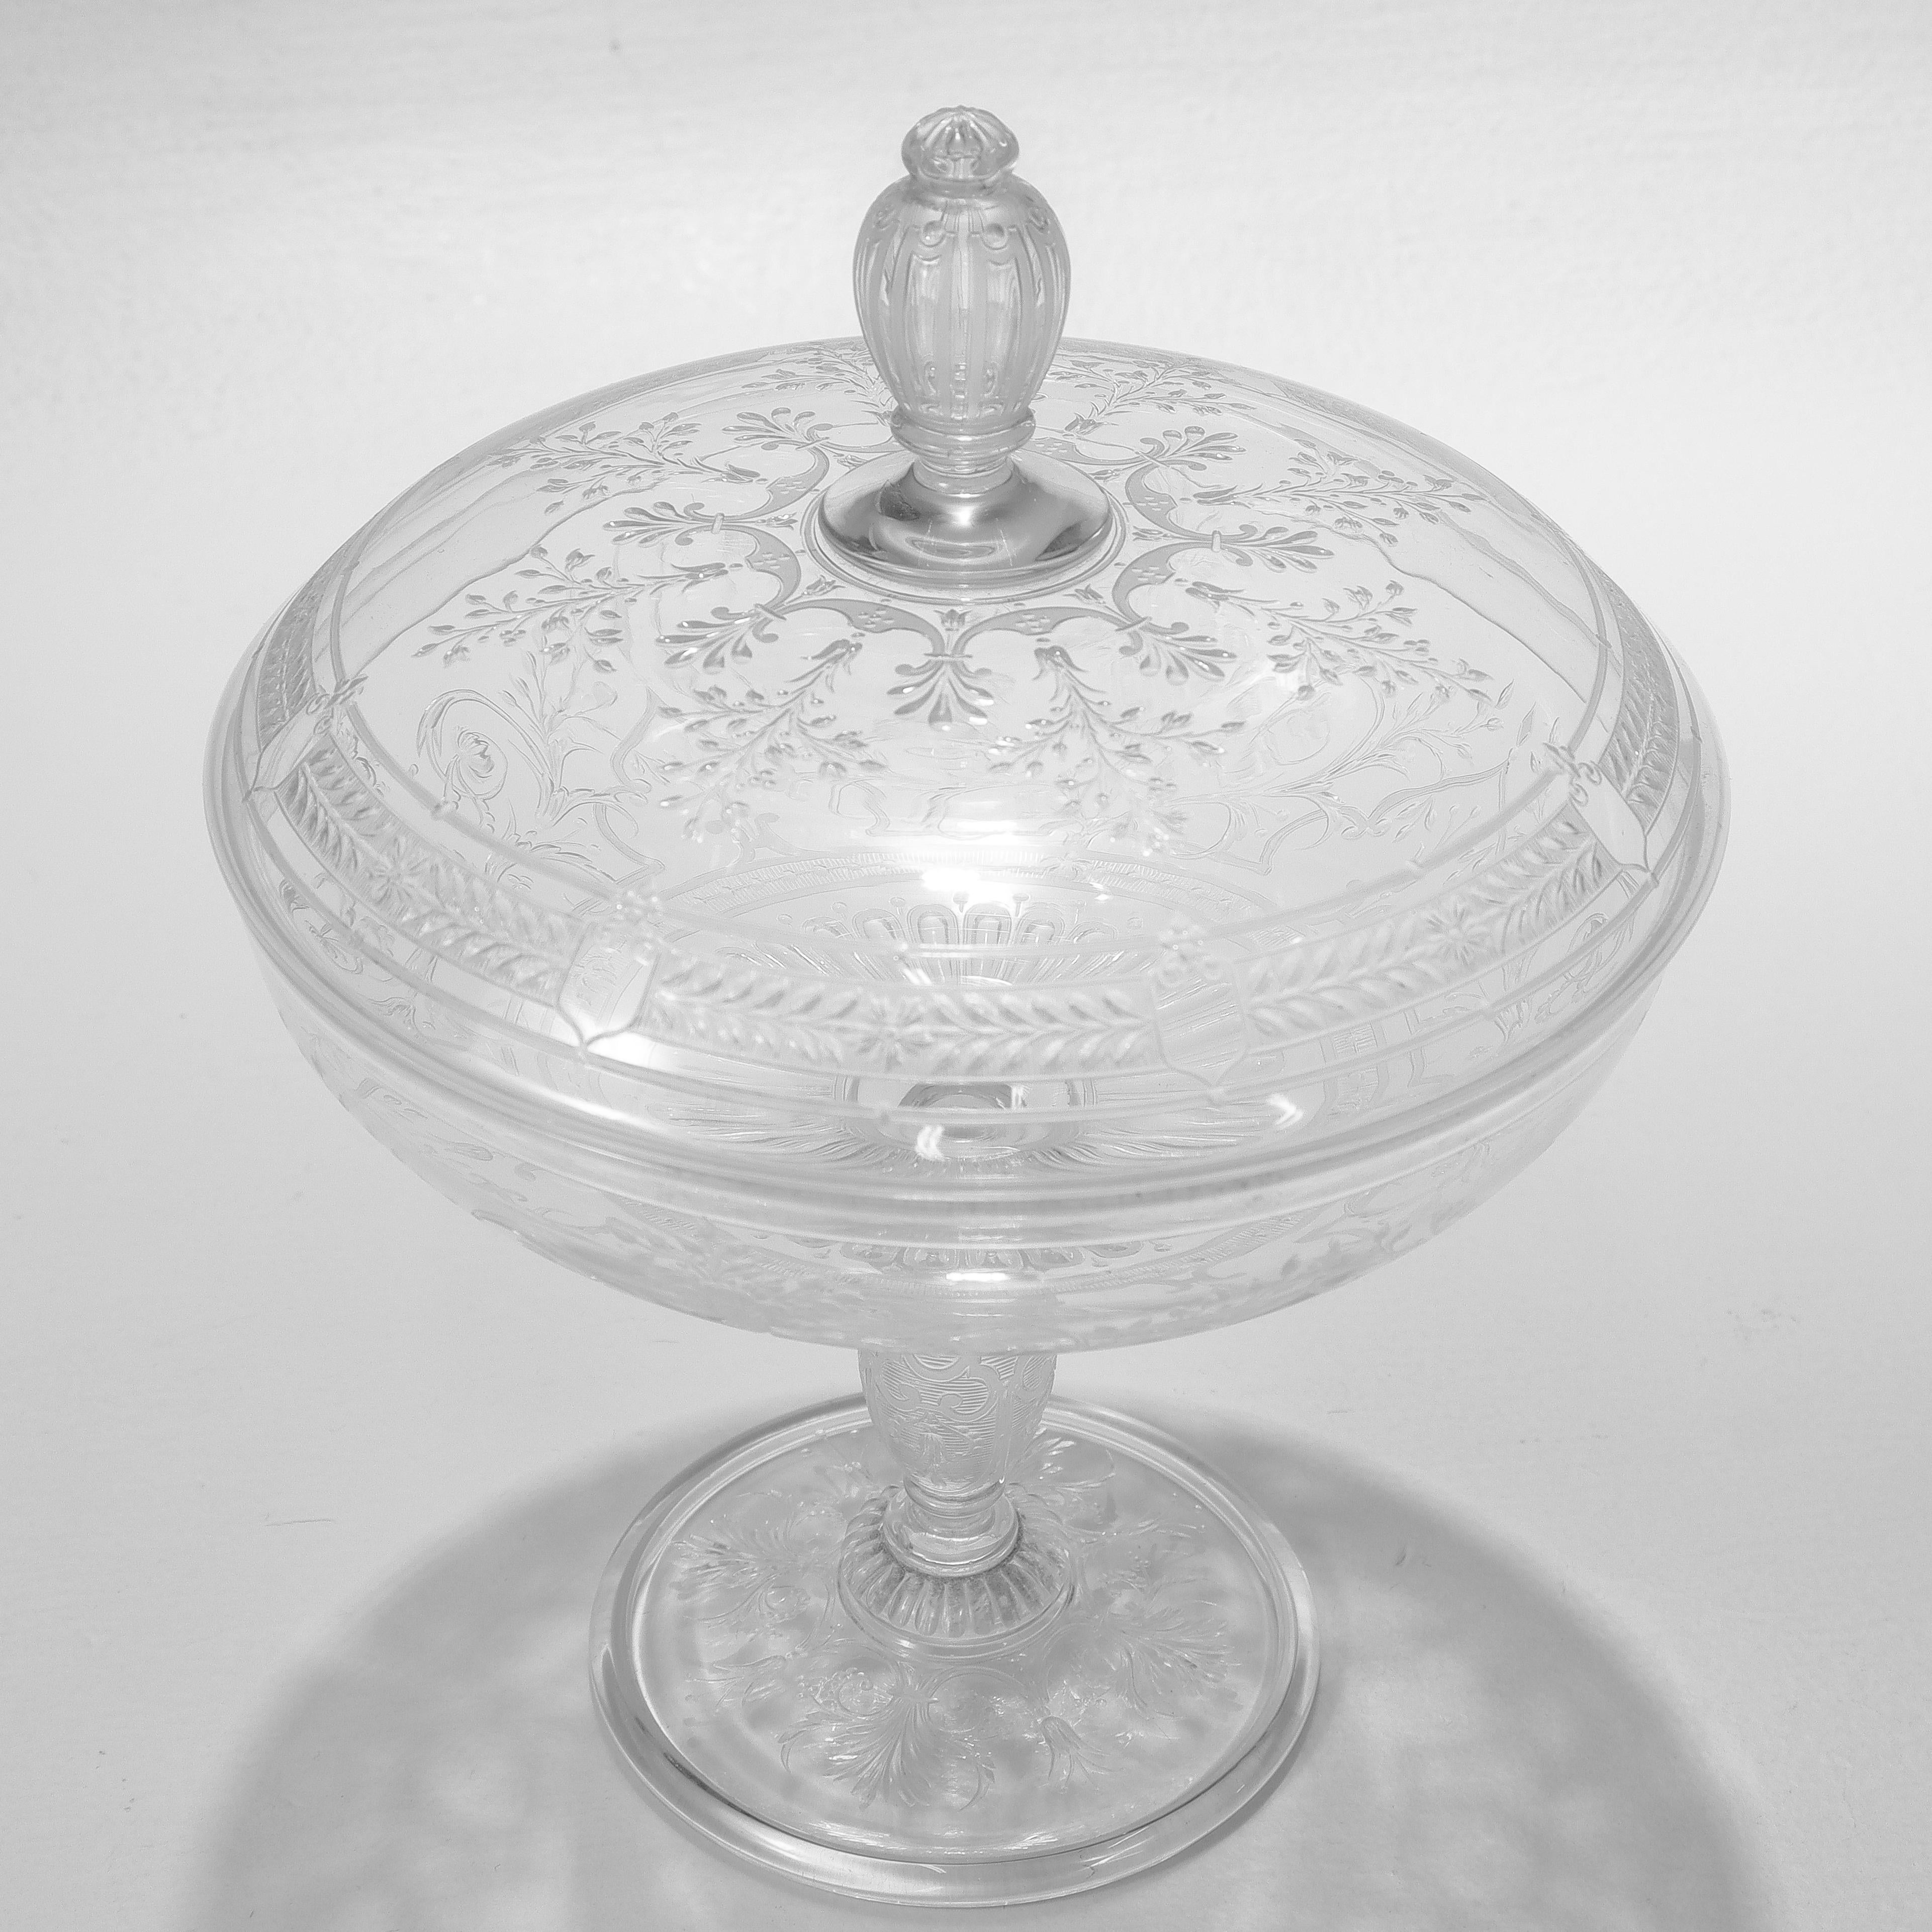 20th Century Antique Stourbridge Etched & Engraved Glass Lidded Compote or Tazza For Sale